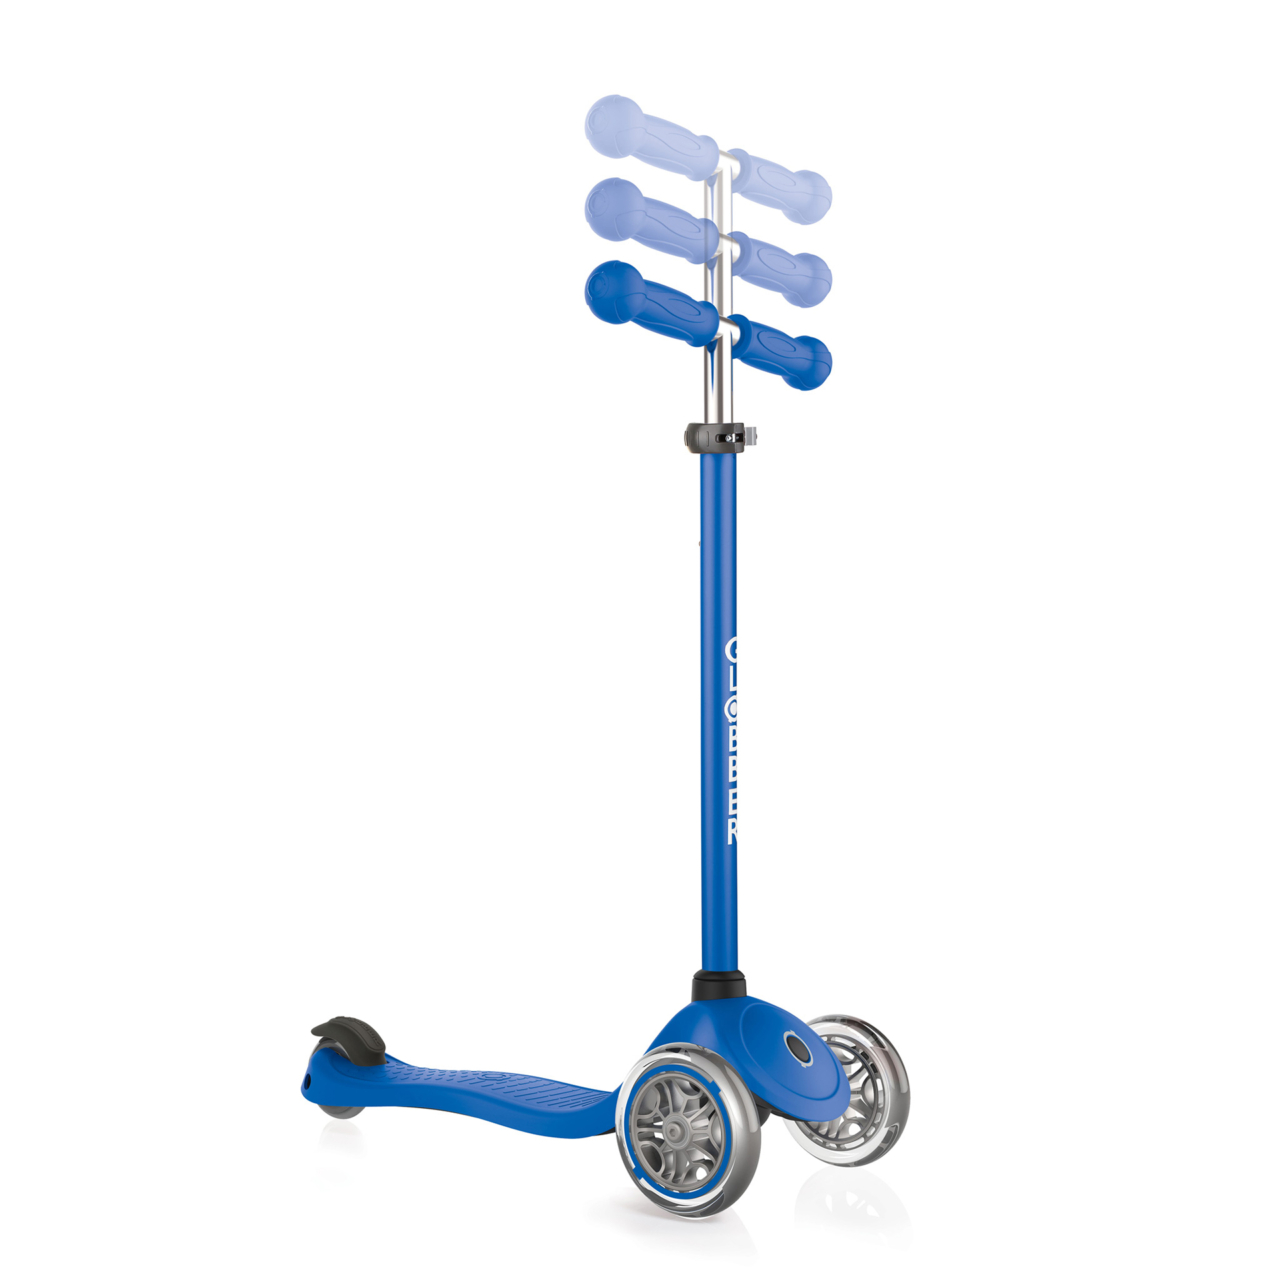 422 100 3 Adjustable Scooter For 3 Year Olds